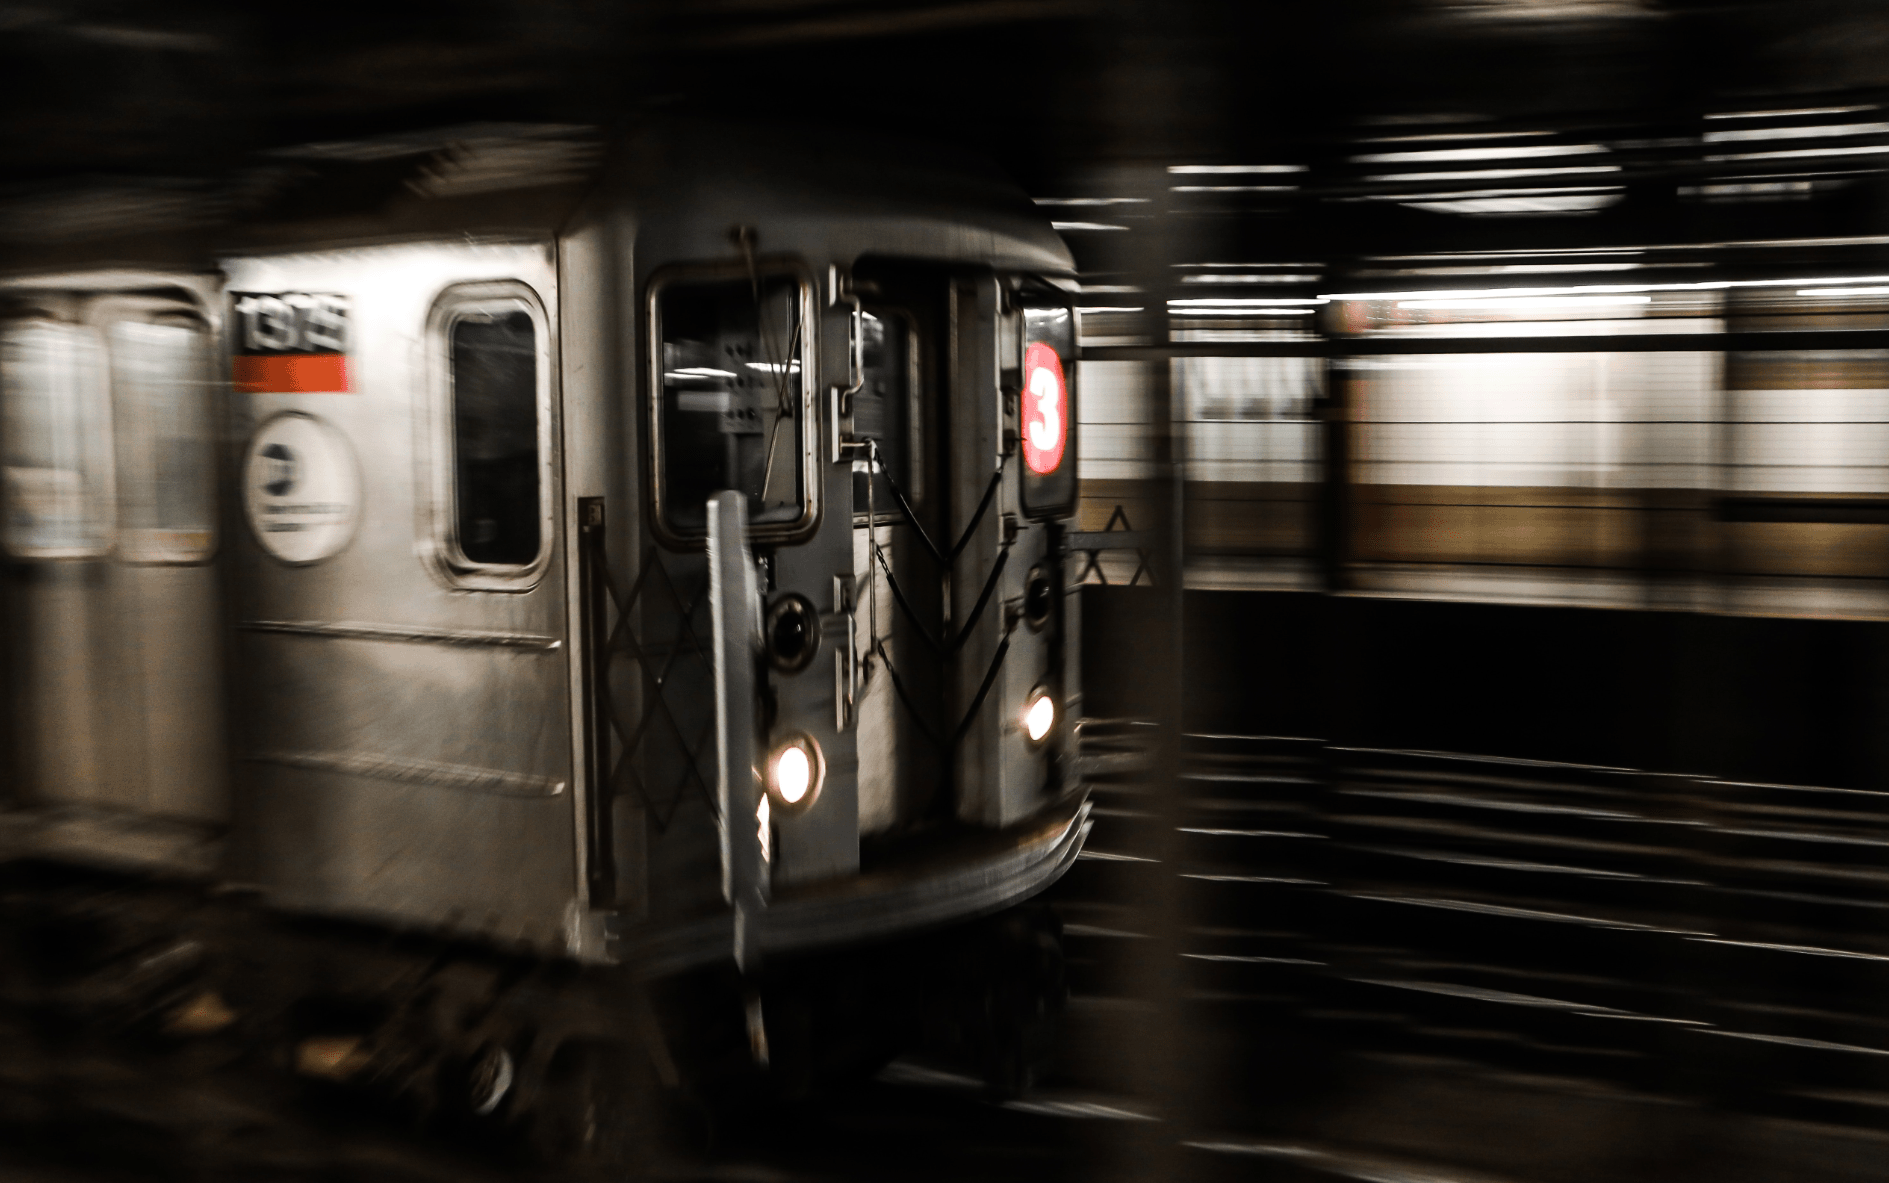 Image of Subway Car Where I Had Stress From Burnout